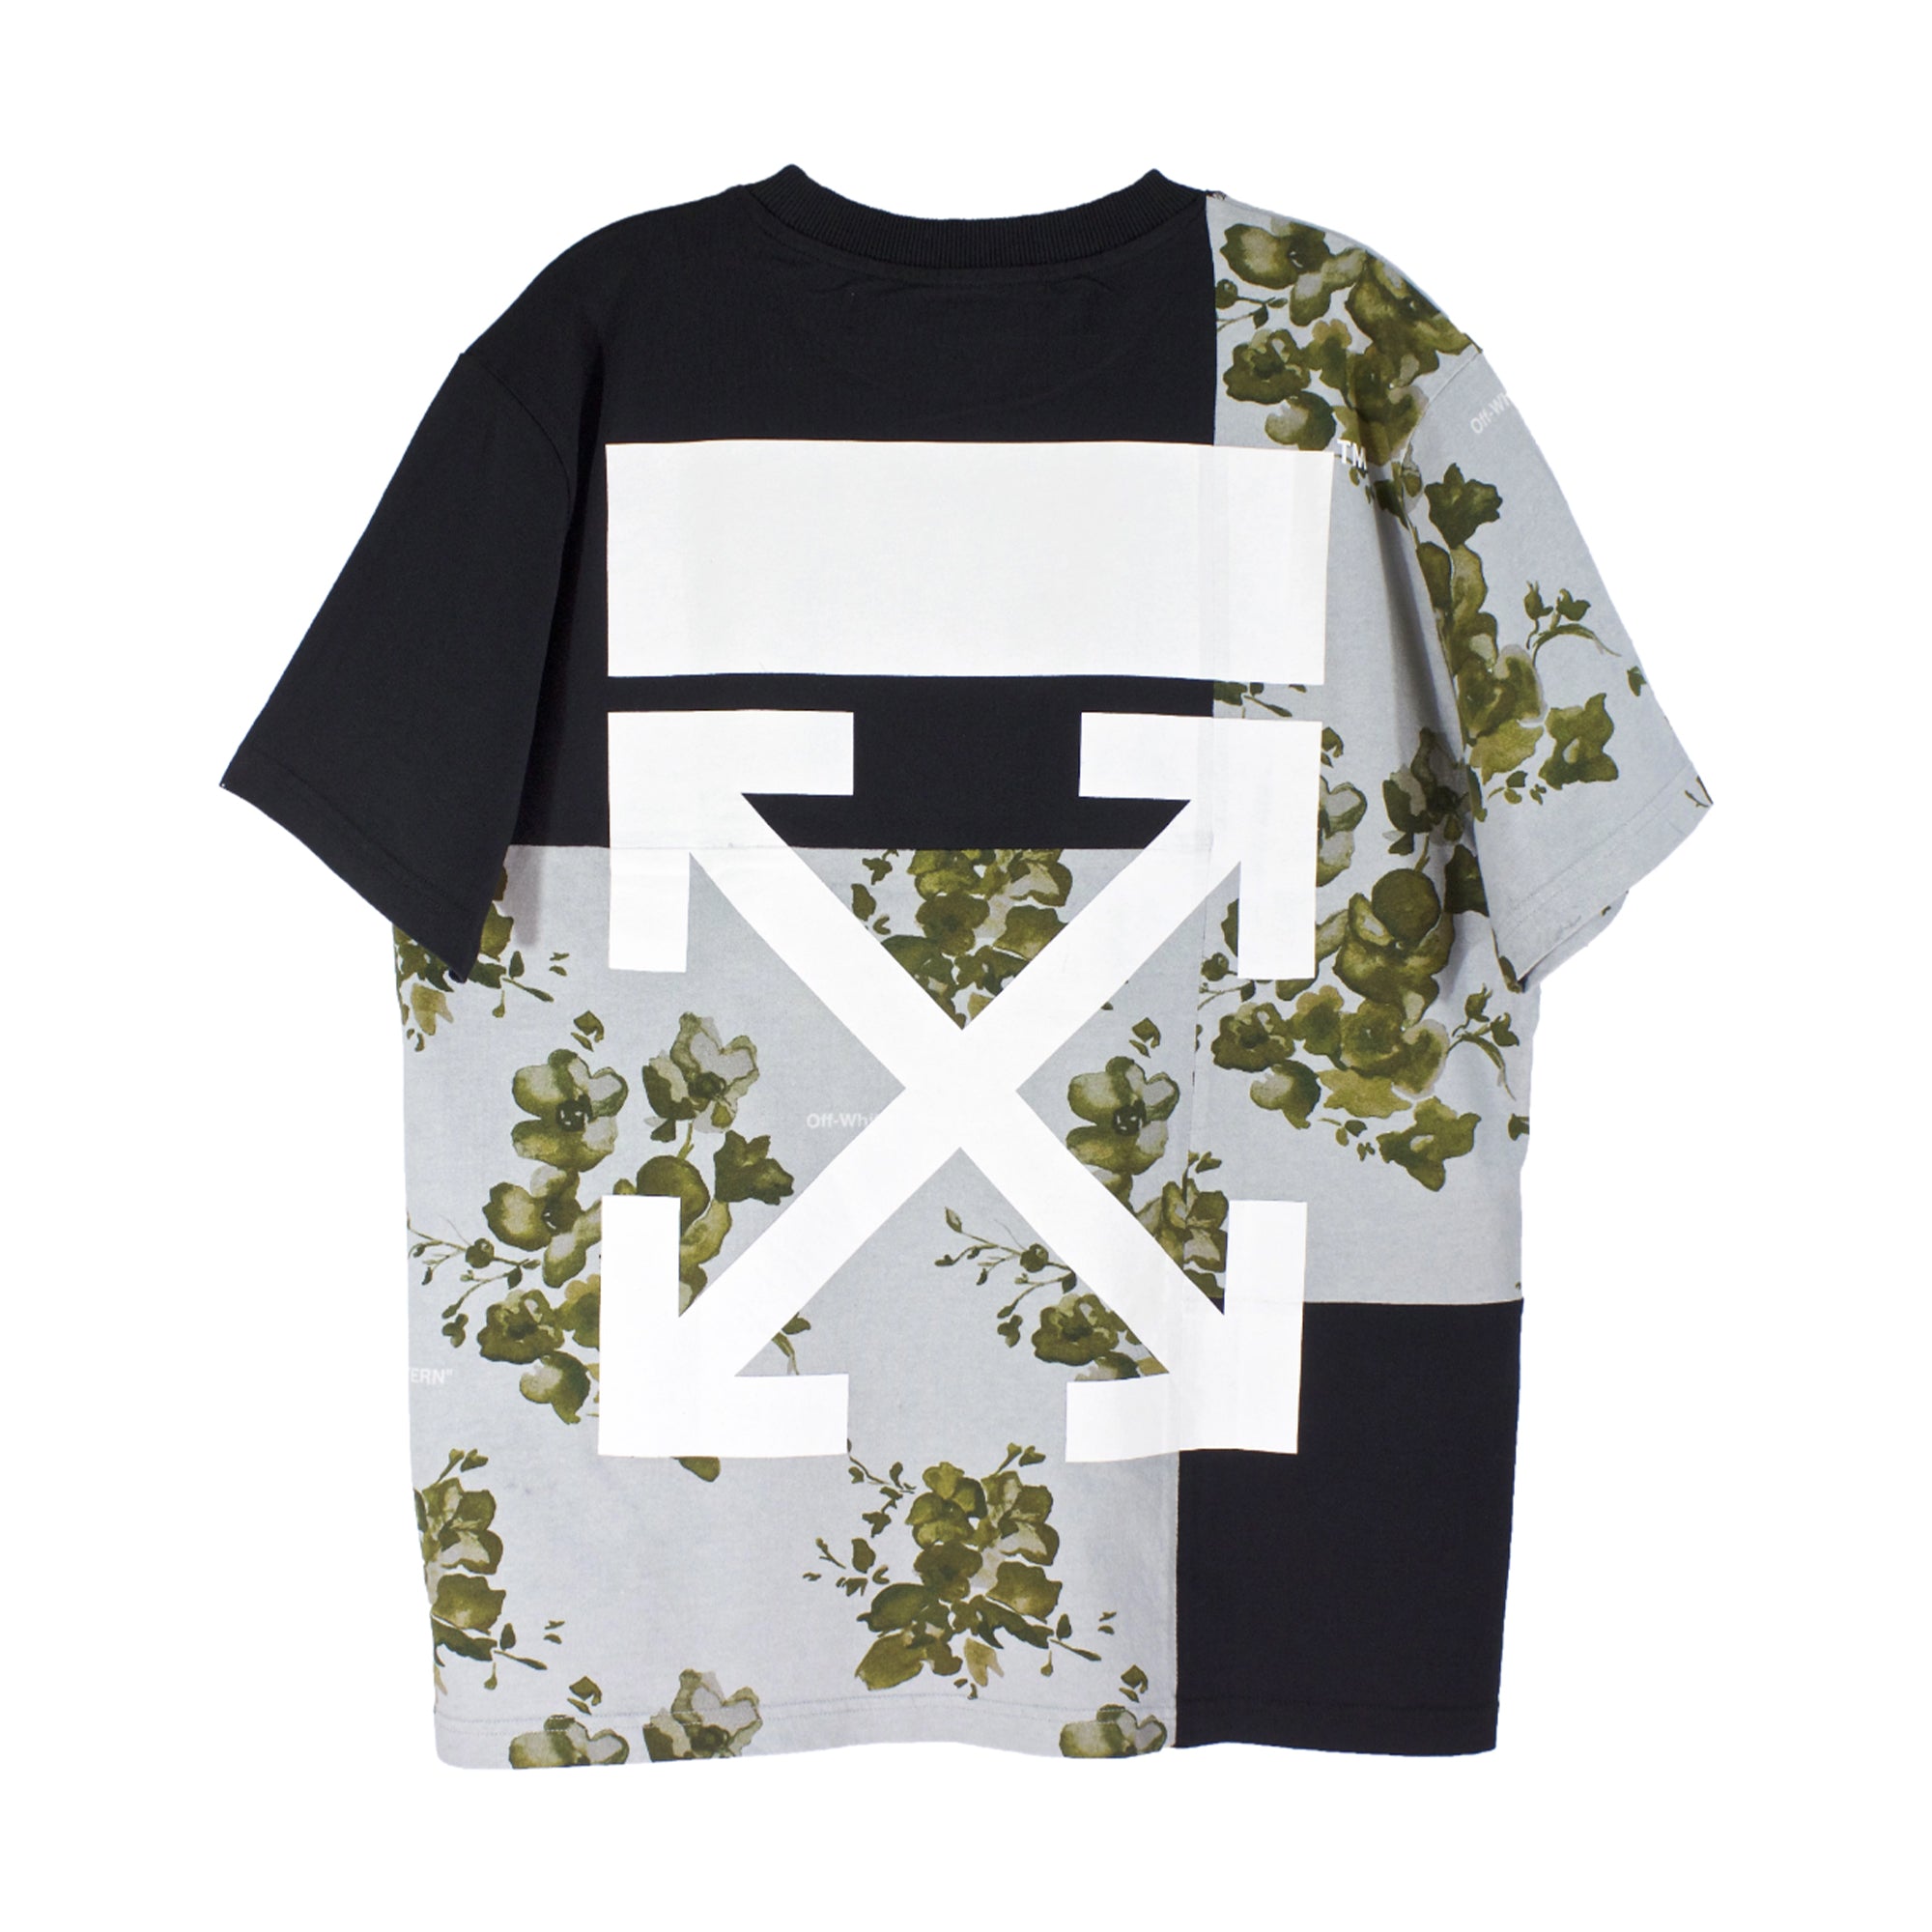 Off-White x Browns Floral T-Shirt-PLUS